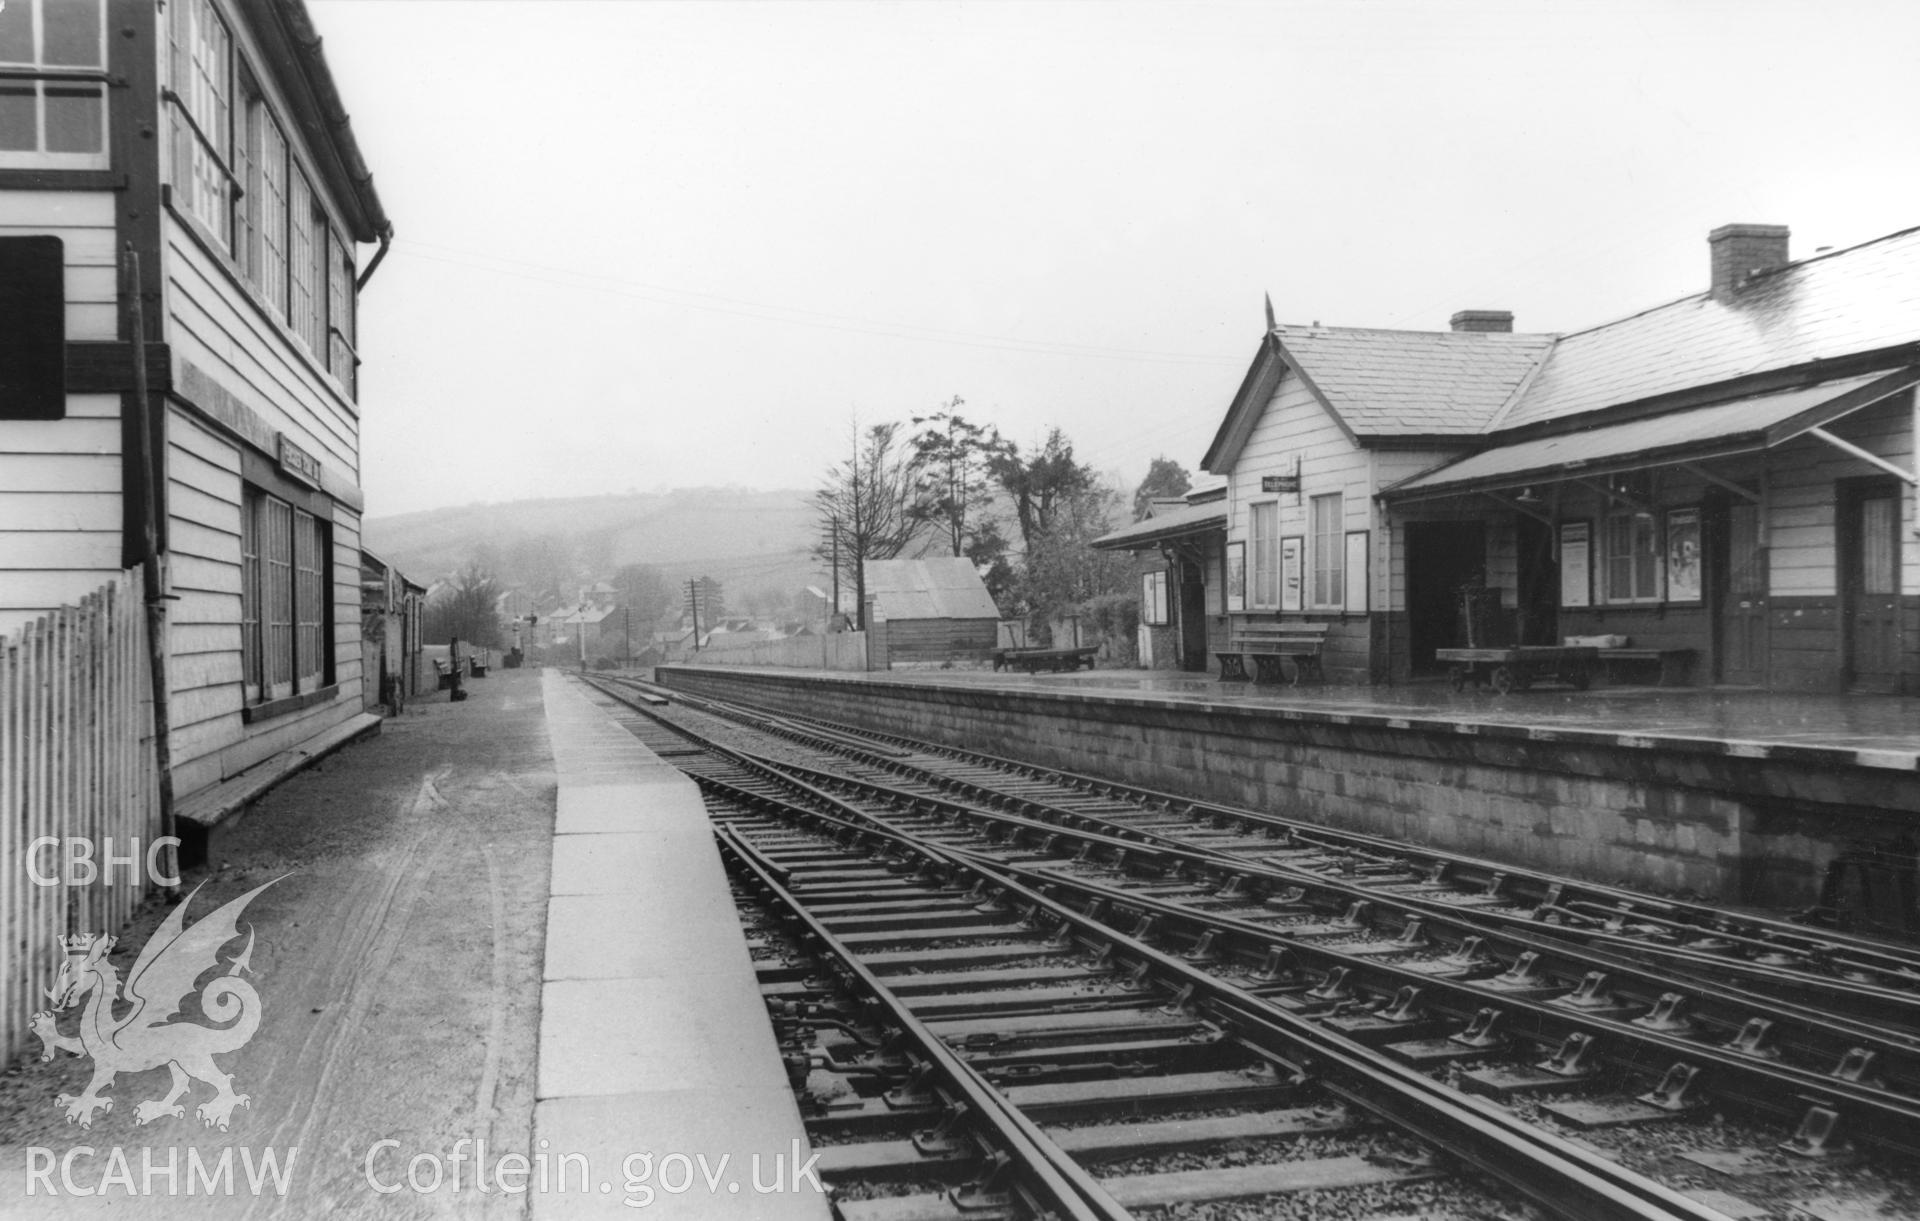 Black and white photograph showing view of Pencader Railway Station. From Rokeby Album III, no 19a